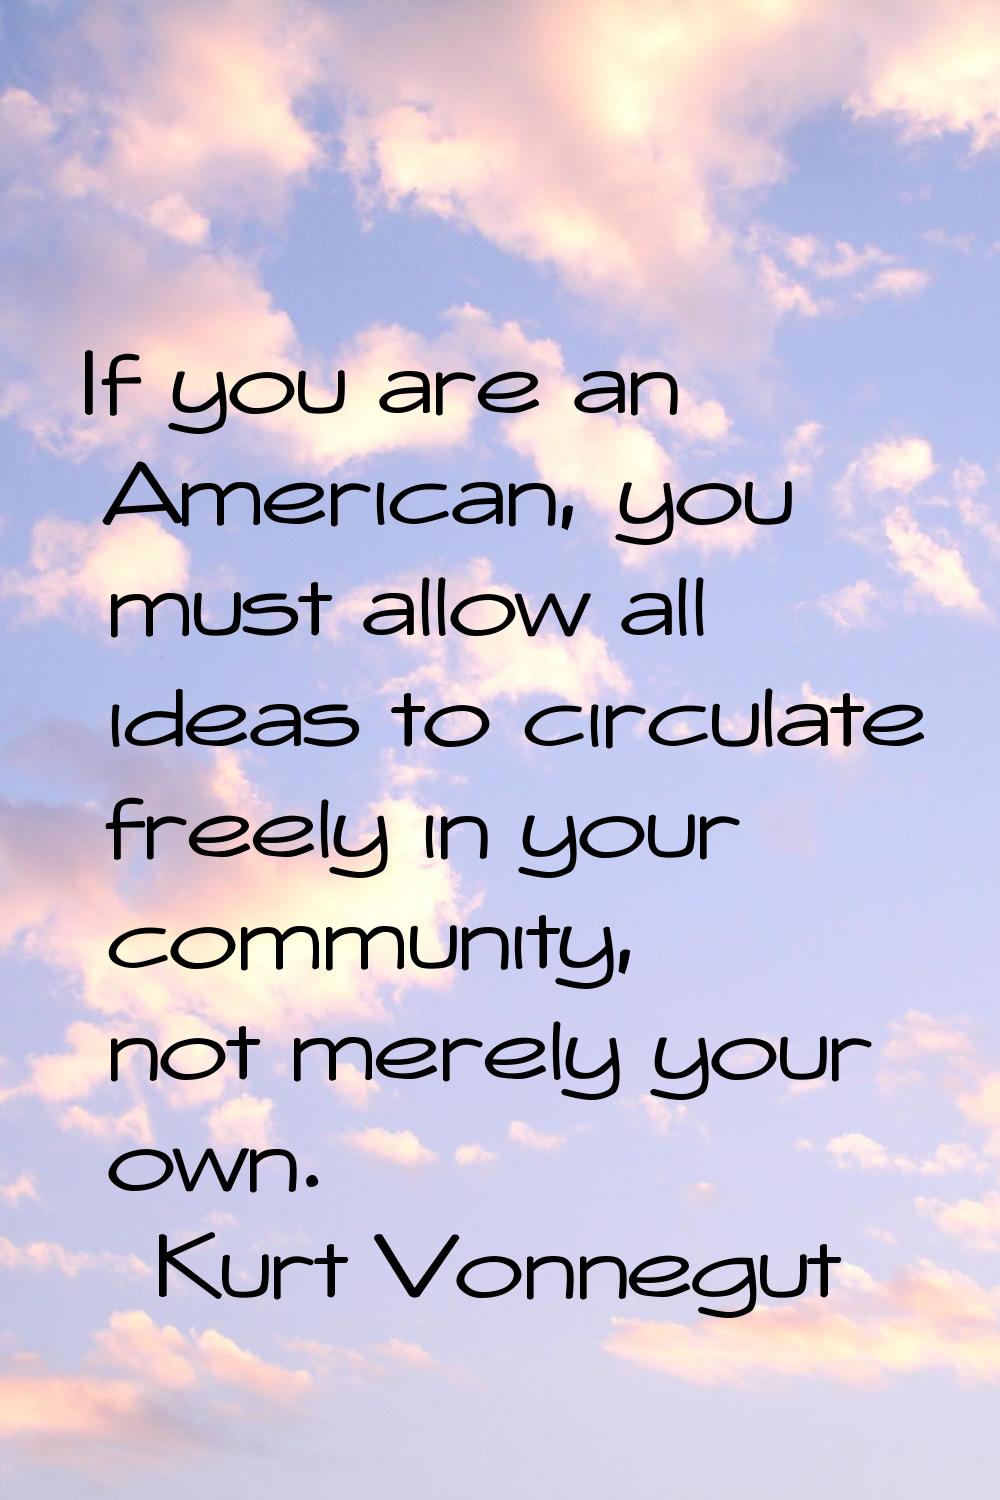 If you are an American, you must allow all ideas to circulate freely in your community, not merely 